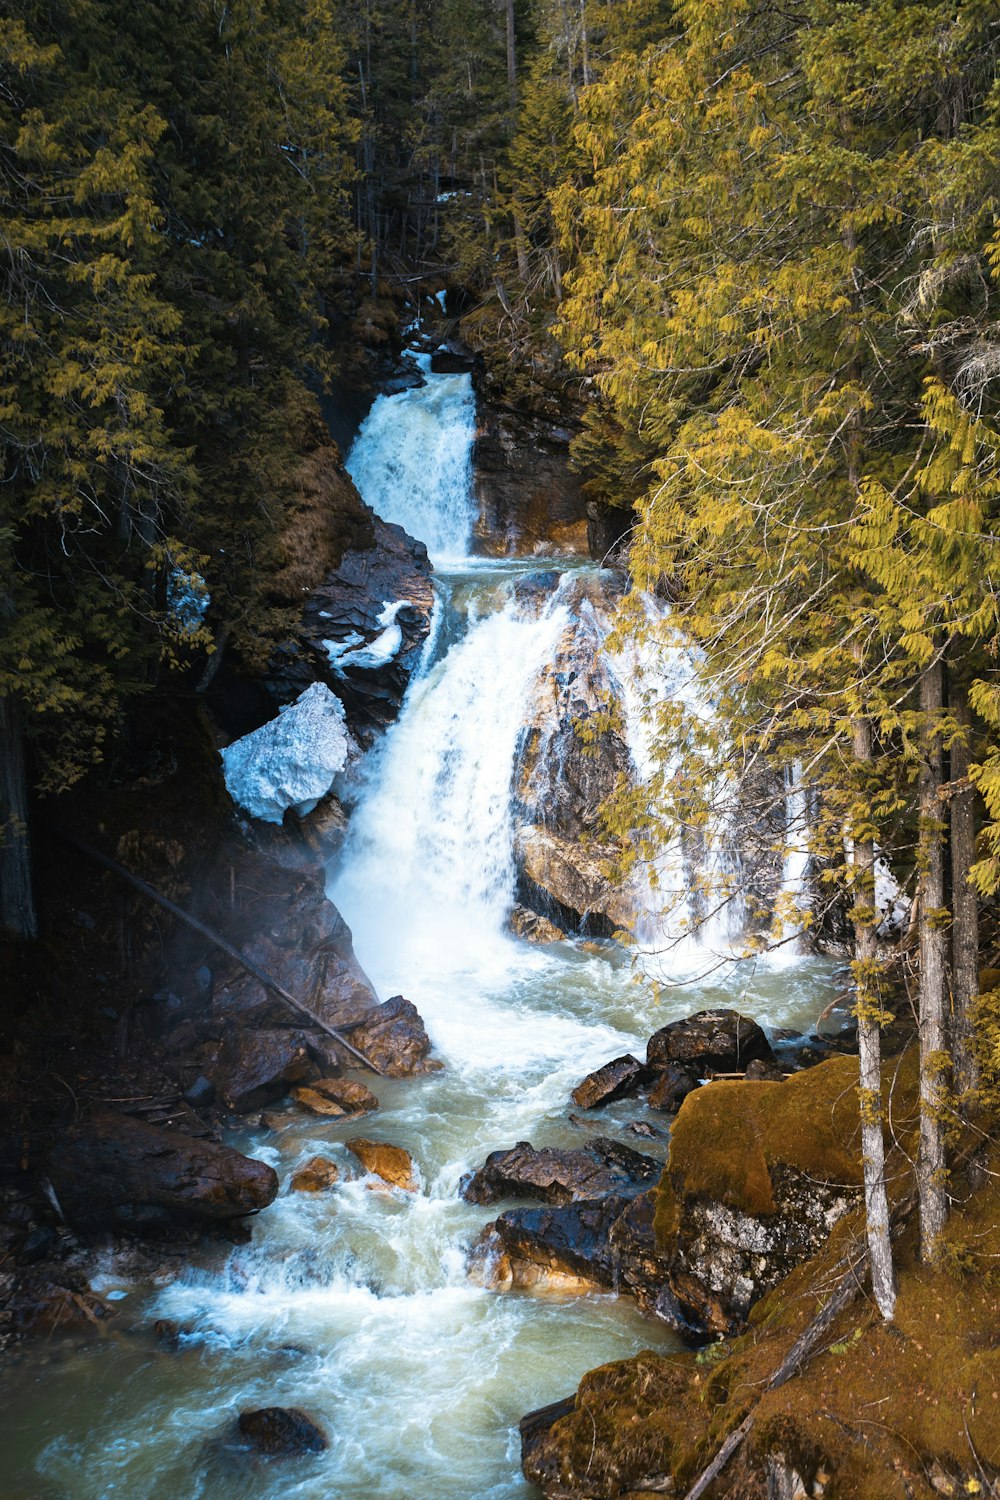 waterfalls in the middle of the forest during daytime